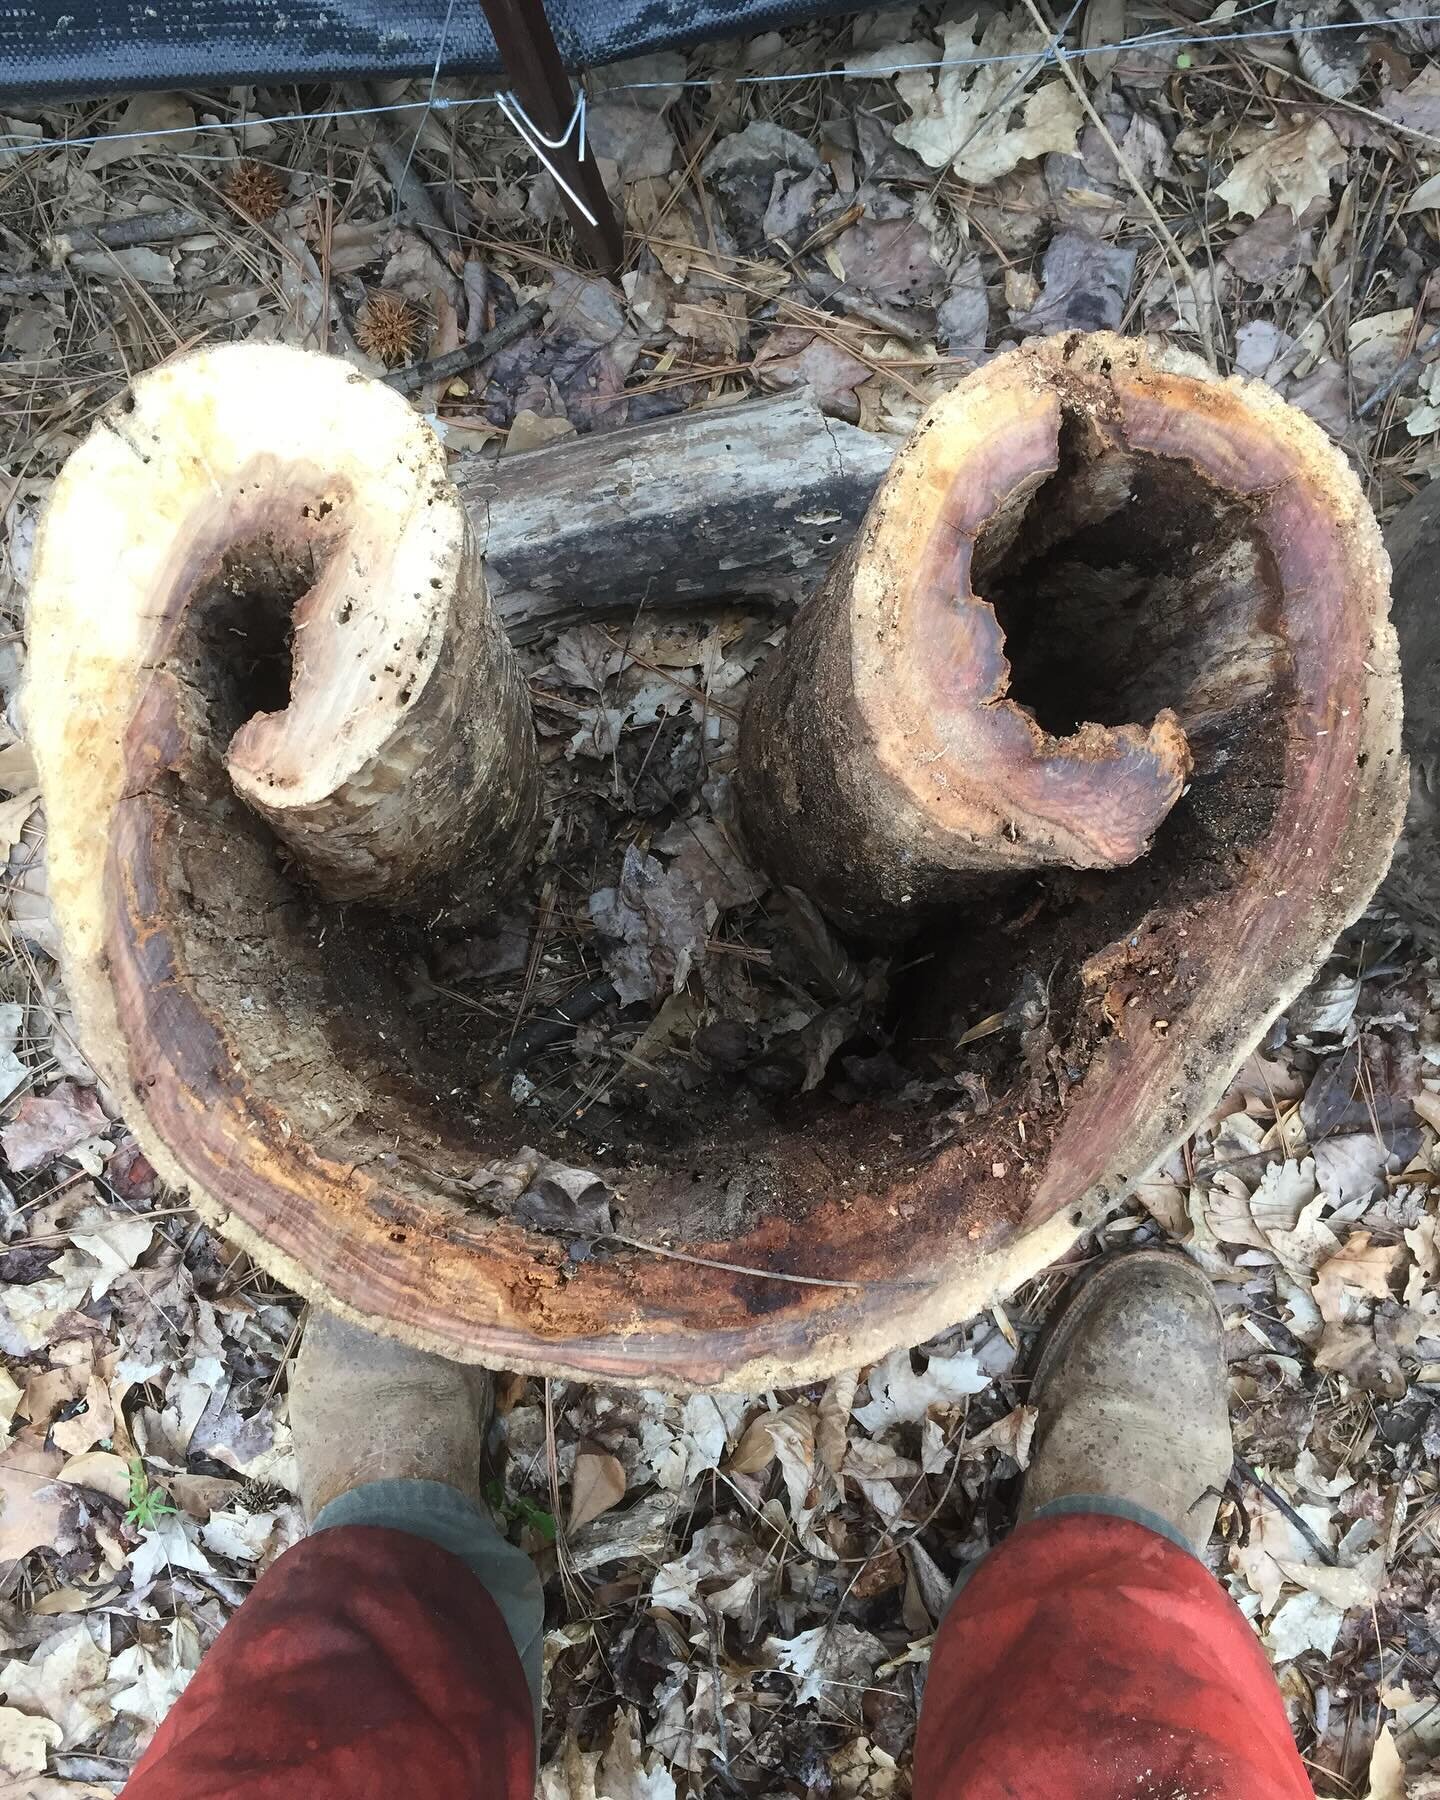 Nature&rsquo;s artistry on display &ndash; stumbled upon this captivating ram&rsquo;s horn in a tree. 🌿 Nature&rsquo;s twists and turns create beauty that never ceases to amaze. #arborcare #treespecialists #TreeMagic #NatureWonders #arblife #treelif